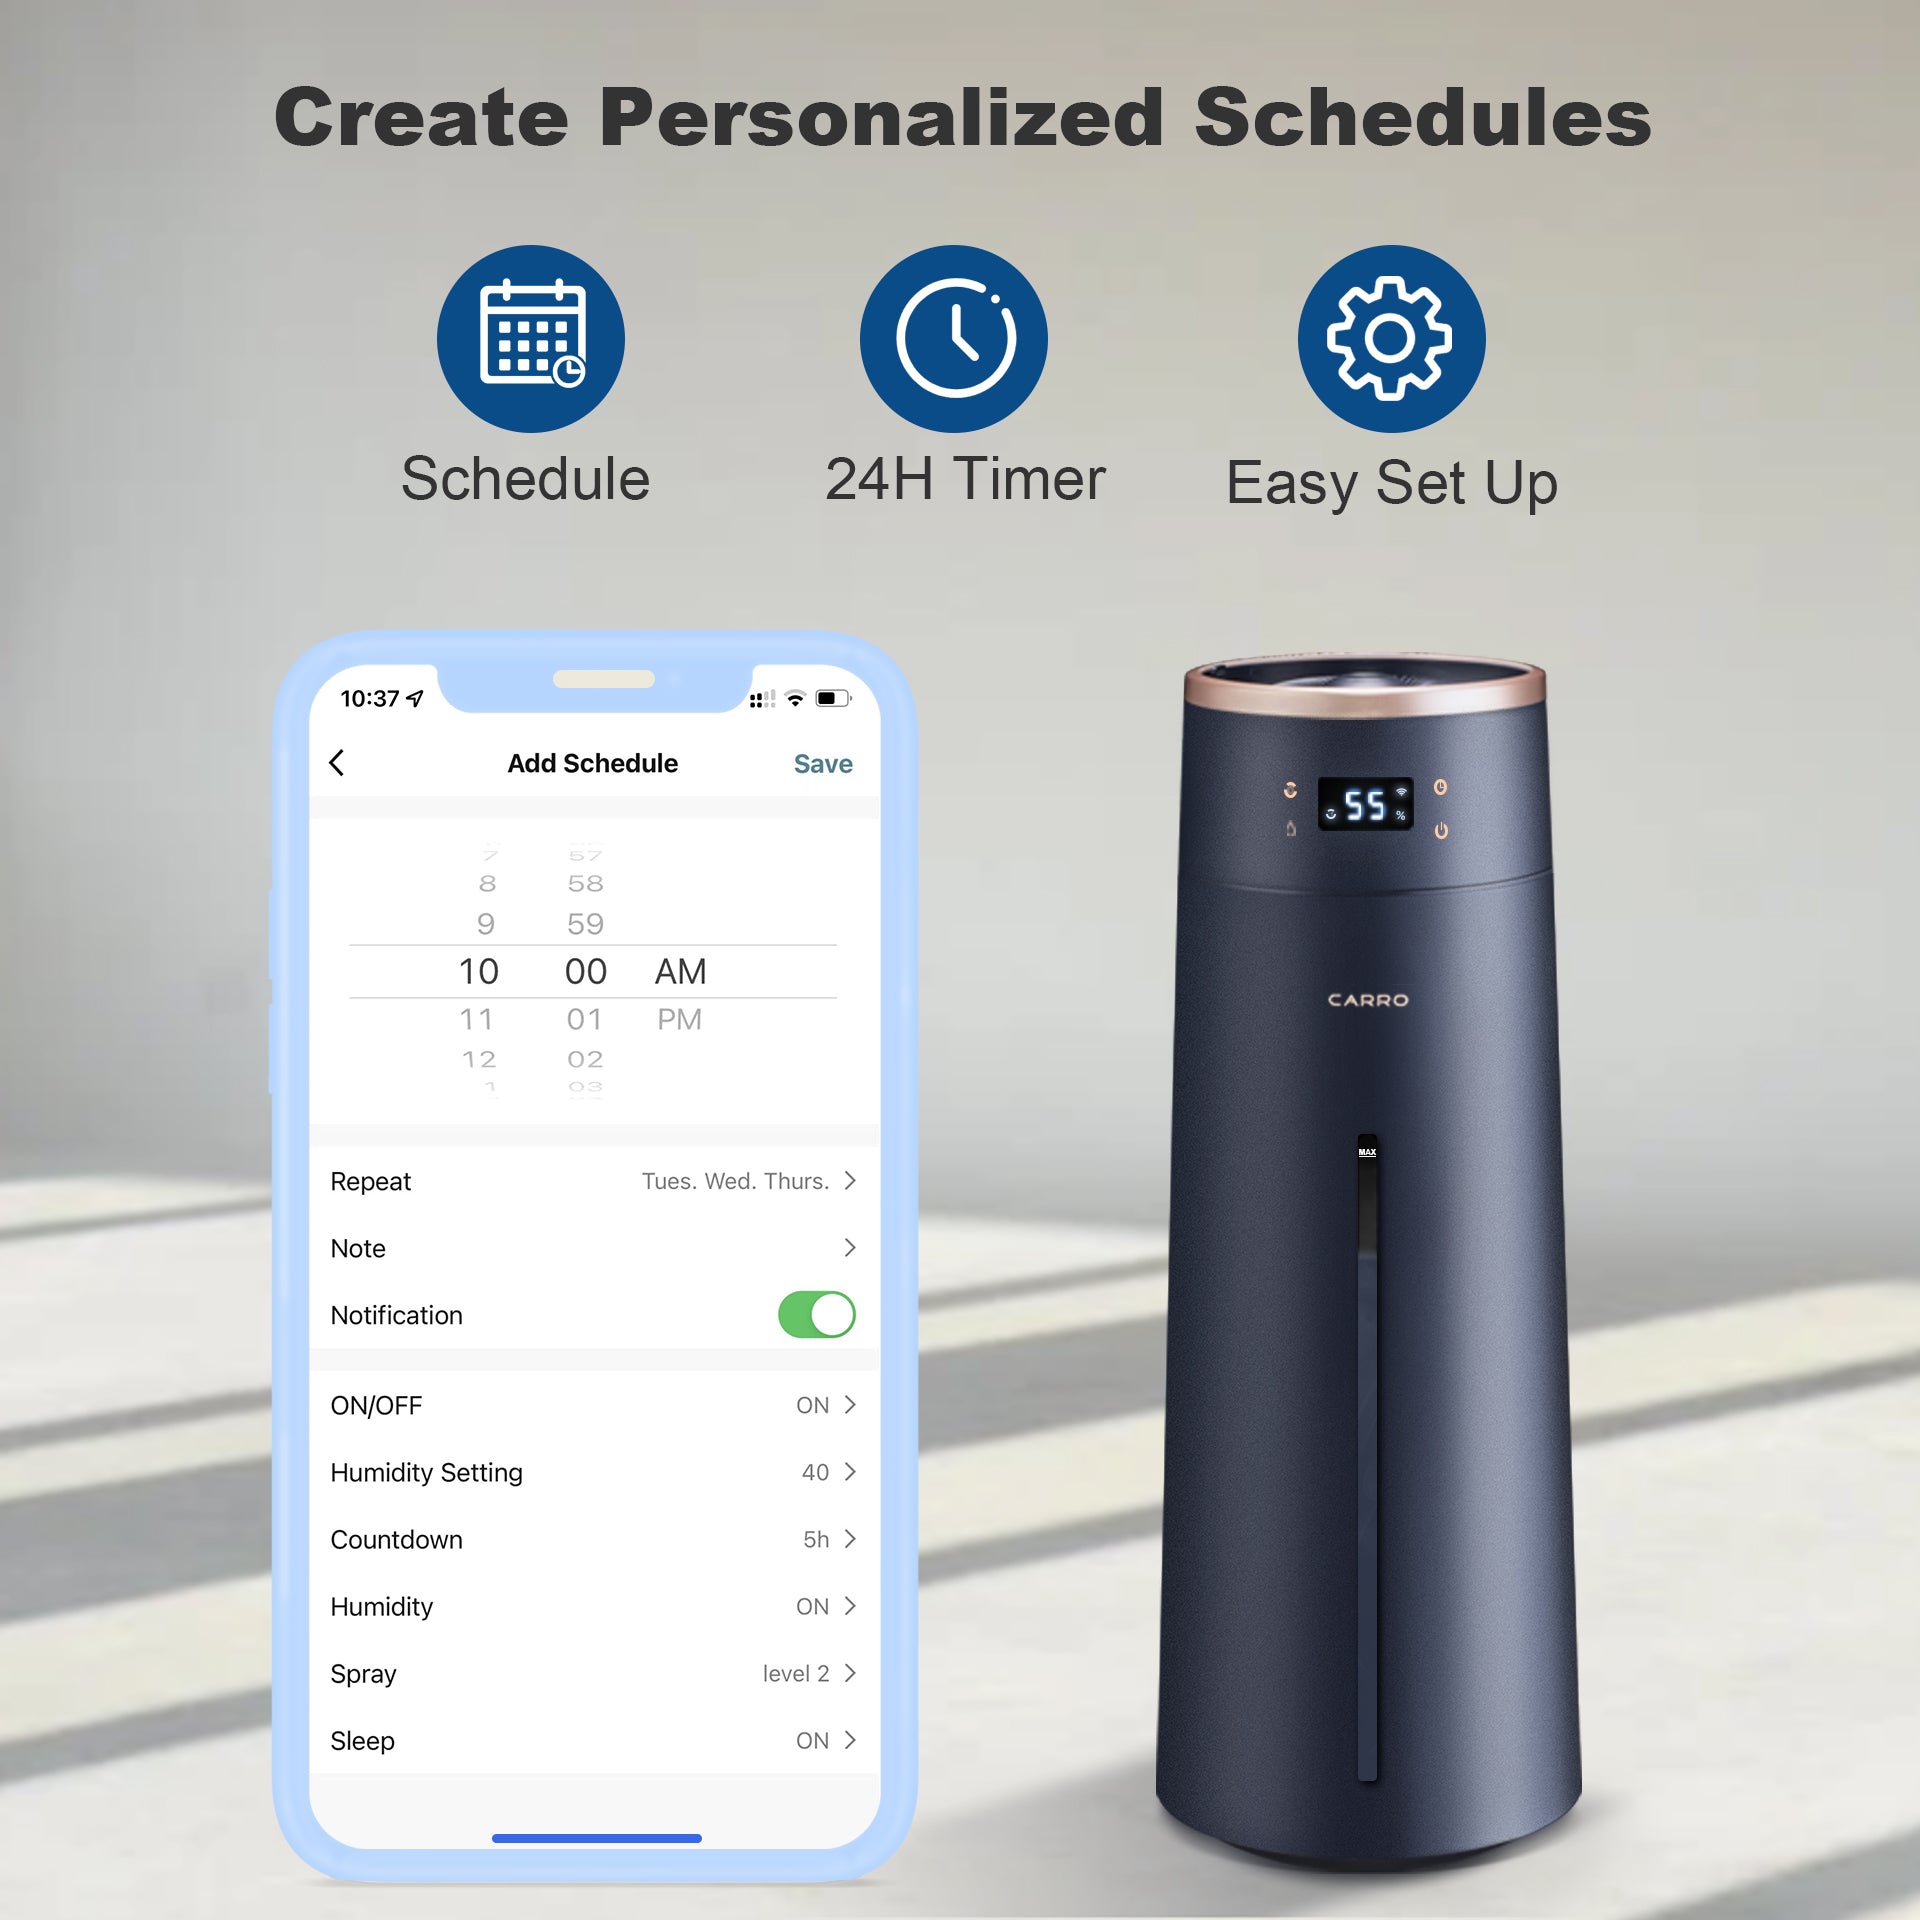 The humidifier features Wi-Fi apps, Siri Shortcut and Voice control technology (compatible with Amazon Alexa and Google Home Assistant ) to set humidity preferences.Carro humidifier helps create better interior environment with more relief and comfort ,for those suffering from colds, allergies and dry skin. 